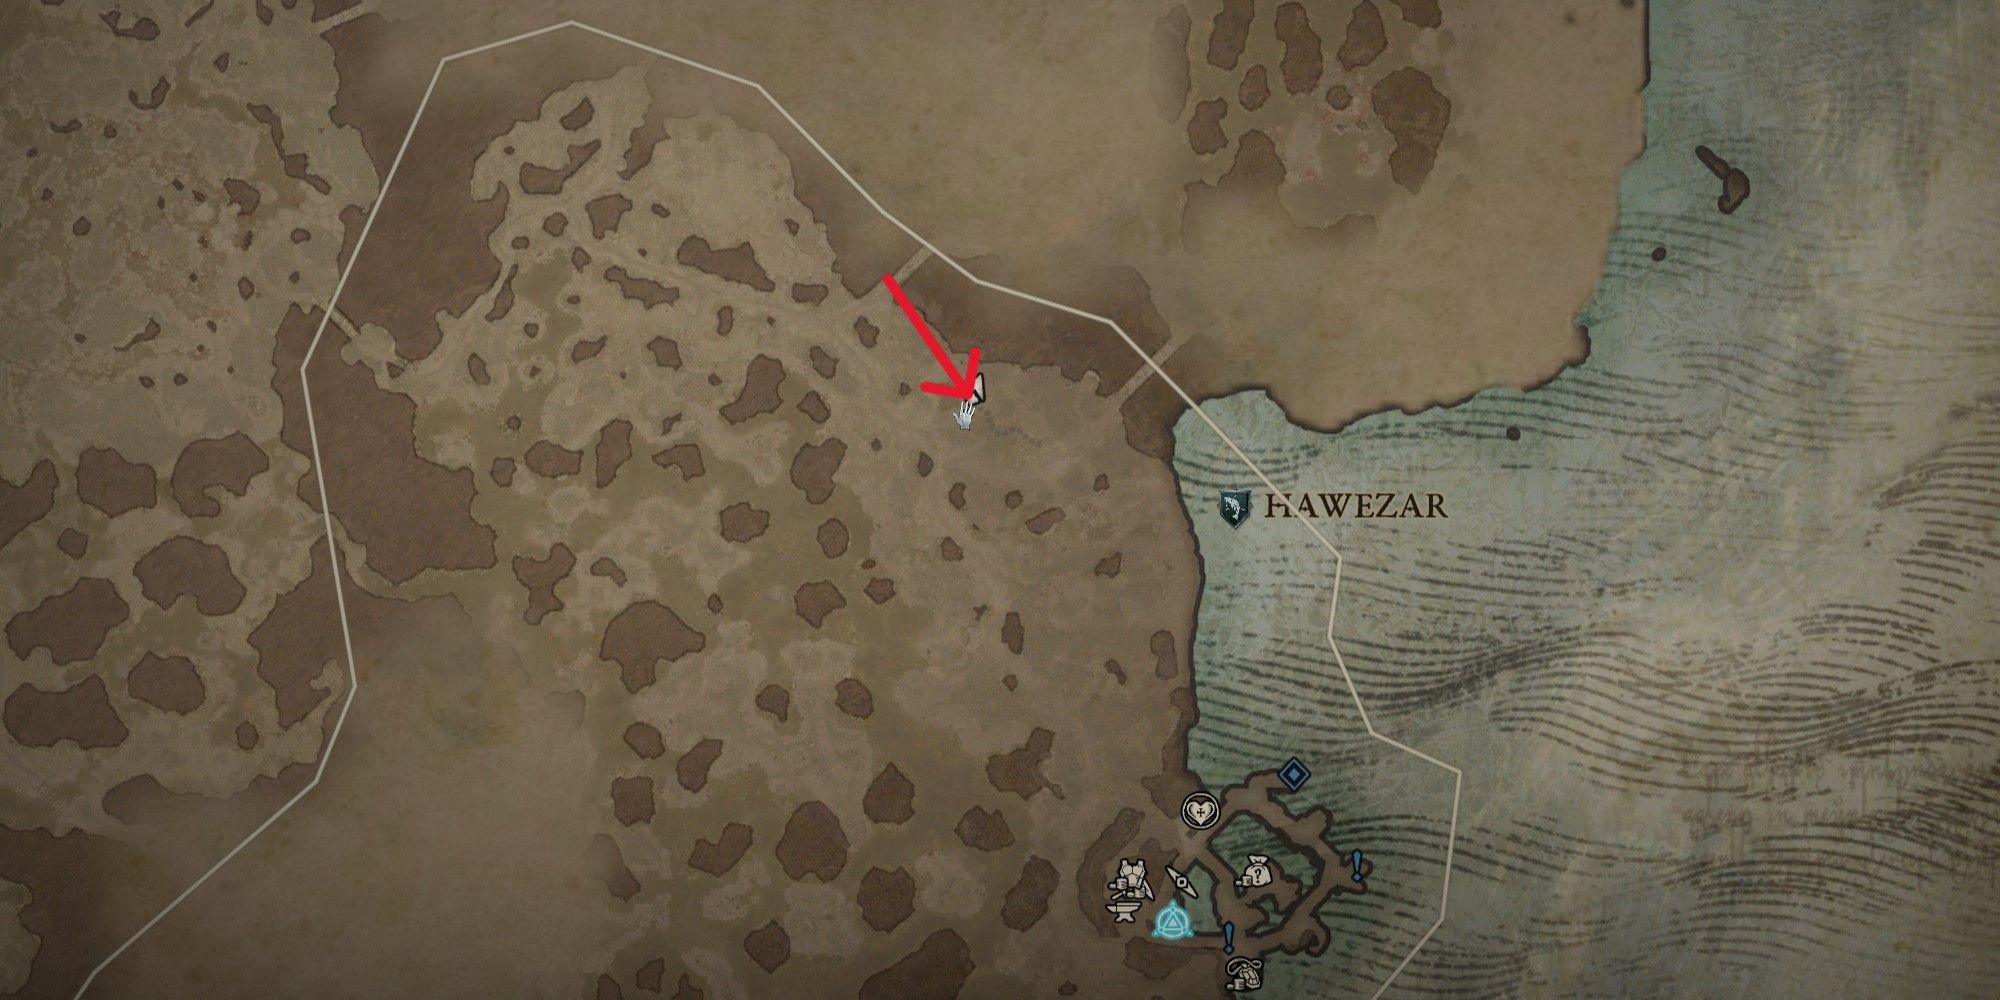 A map of Hawezar showing the location of the red mushroom in Diablo 4's Bried to Heel expedition